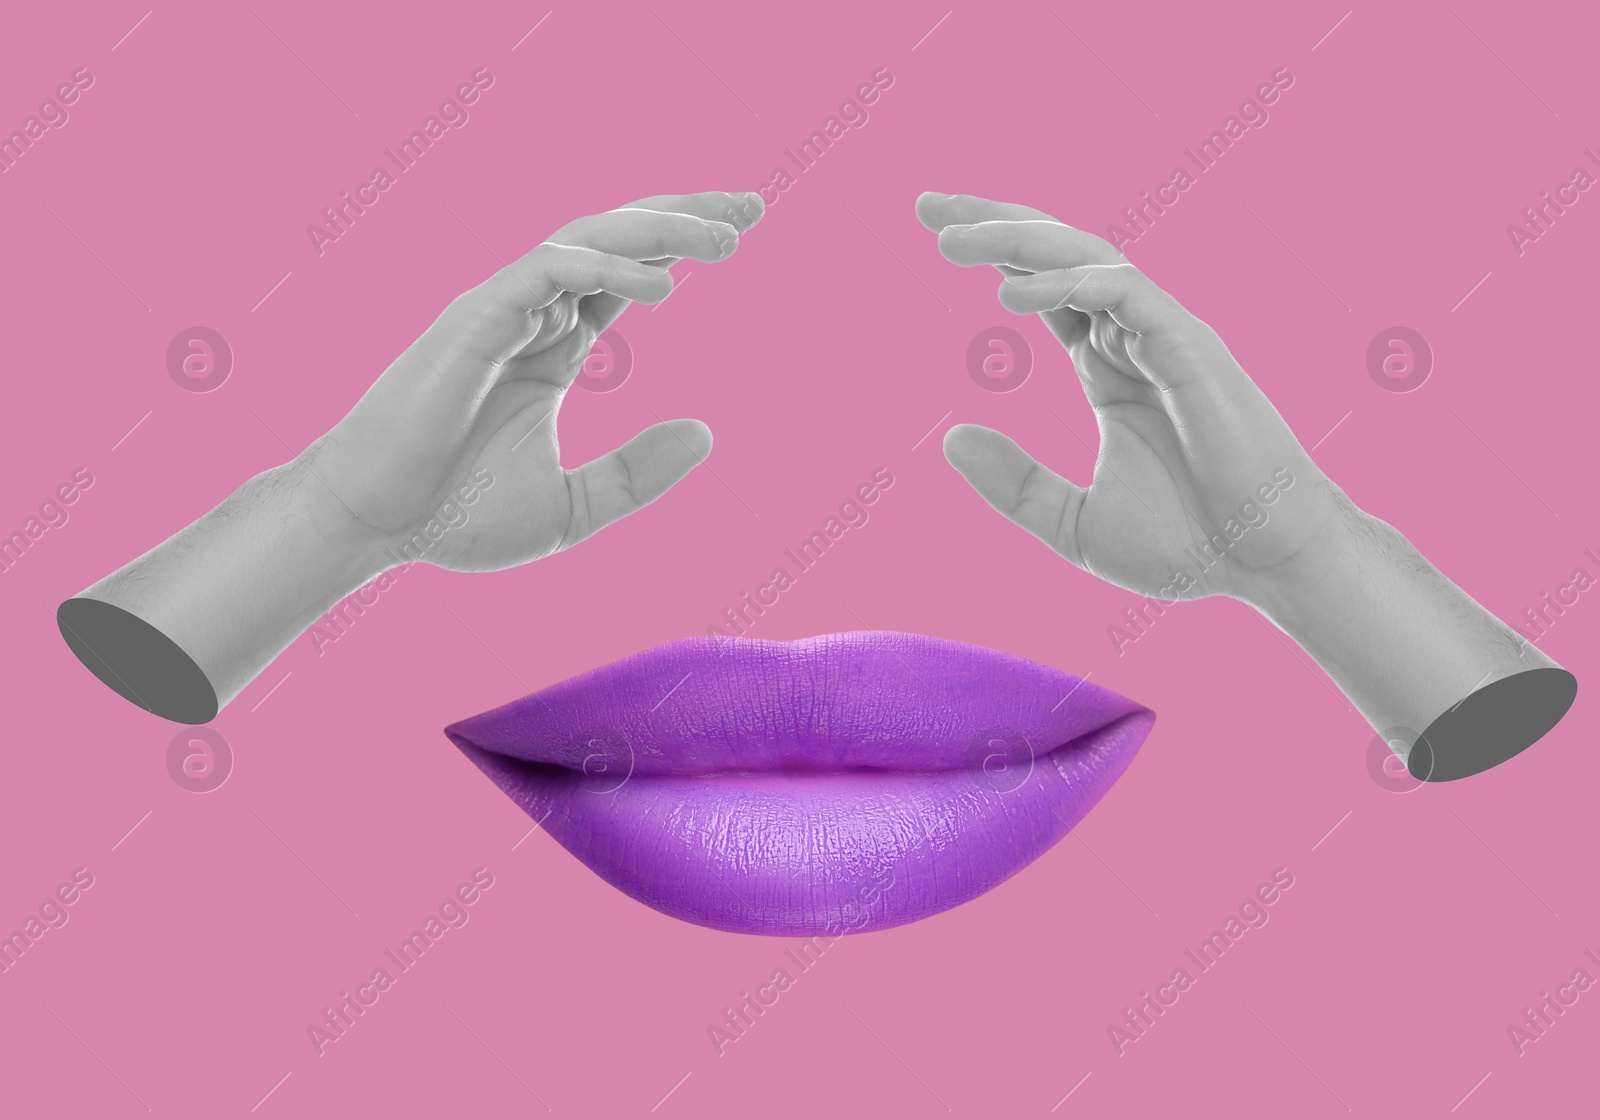 Image of Female lips and hands on dark pink background, stylish art collage